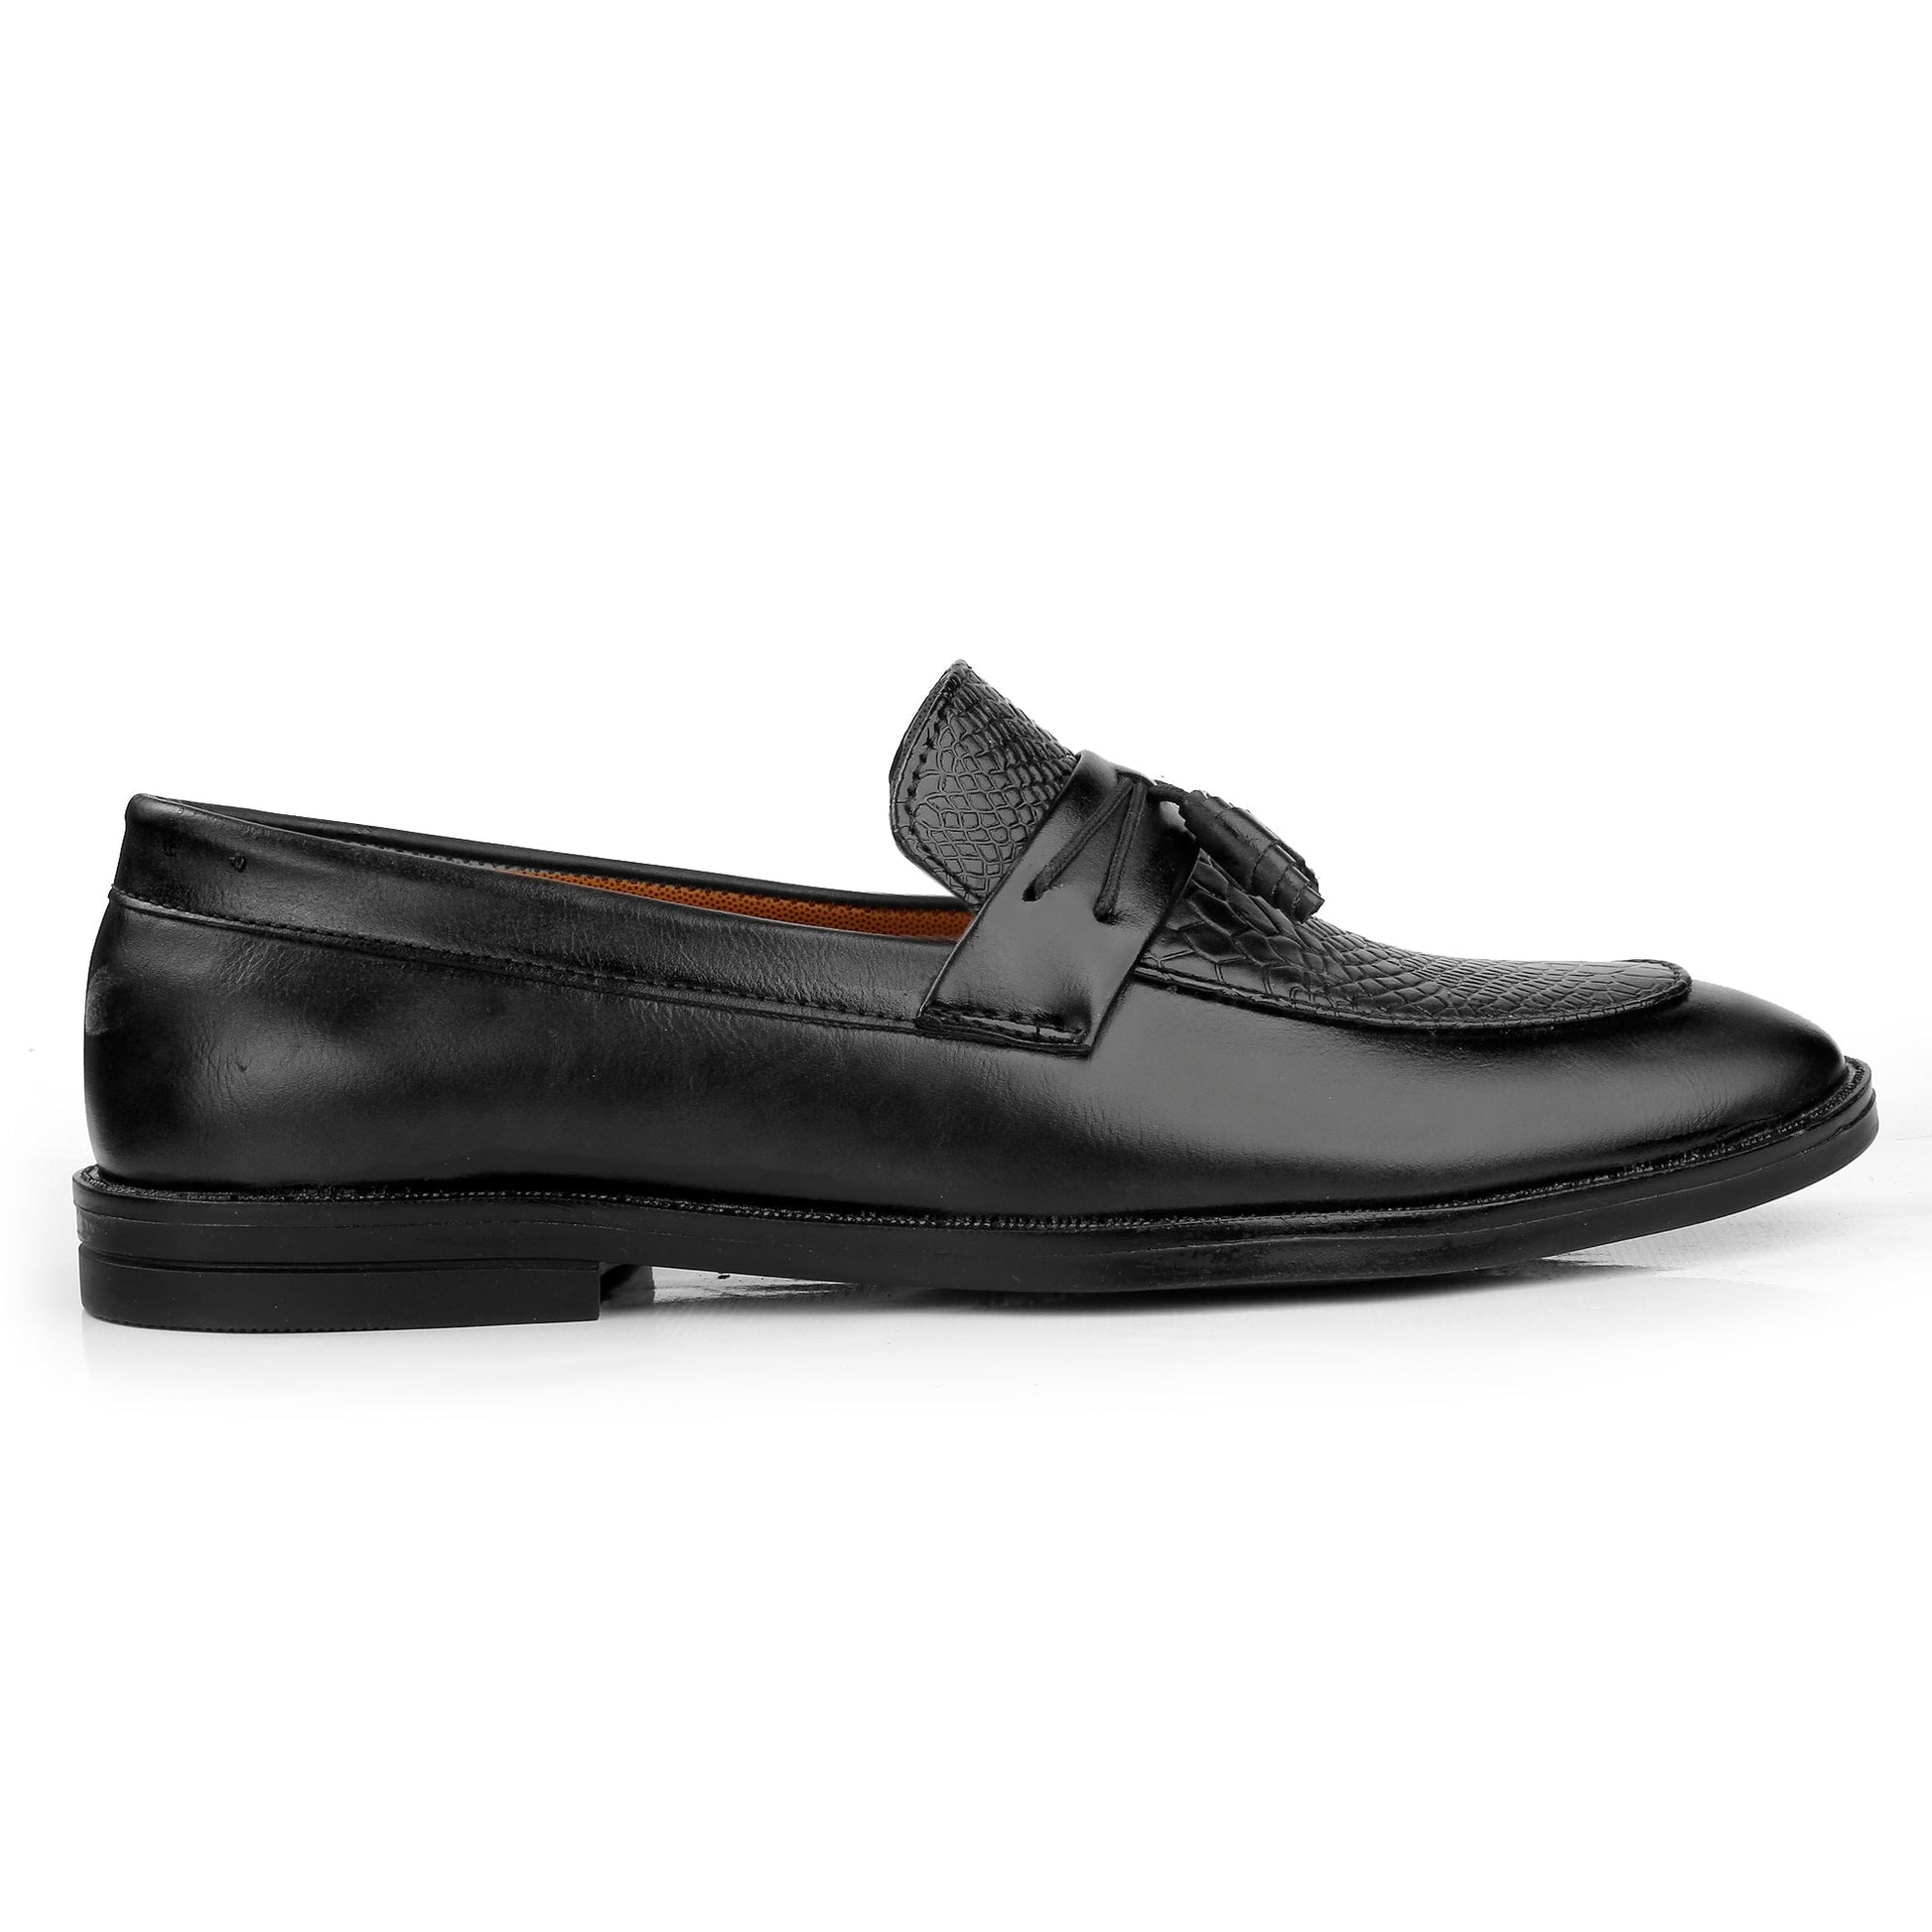 Luxury Design Fashion Moccasin Shoes For Men Party And Casual Wear -JackMarc - JACKMARC.COM